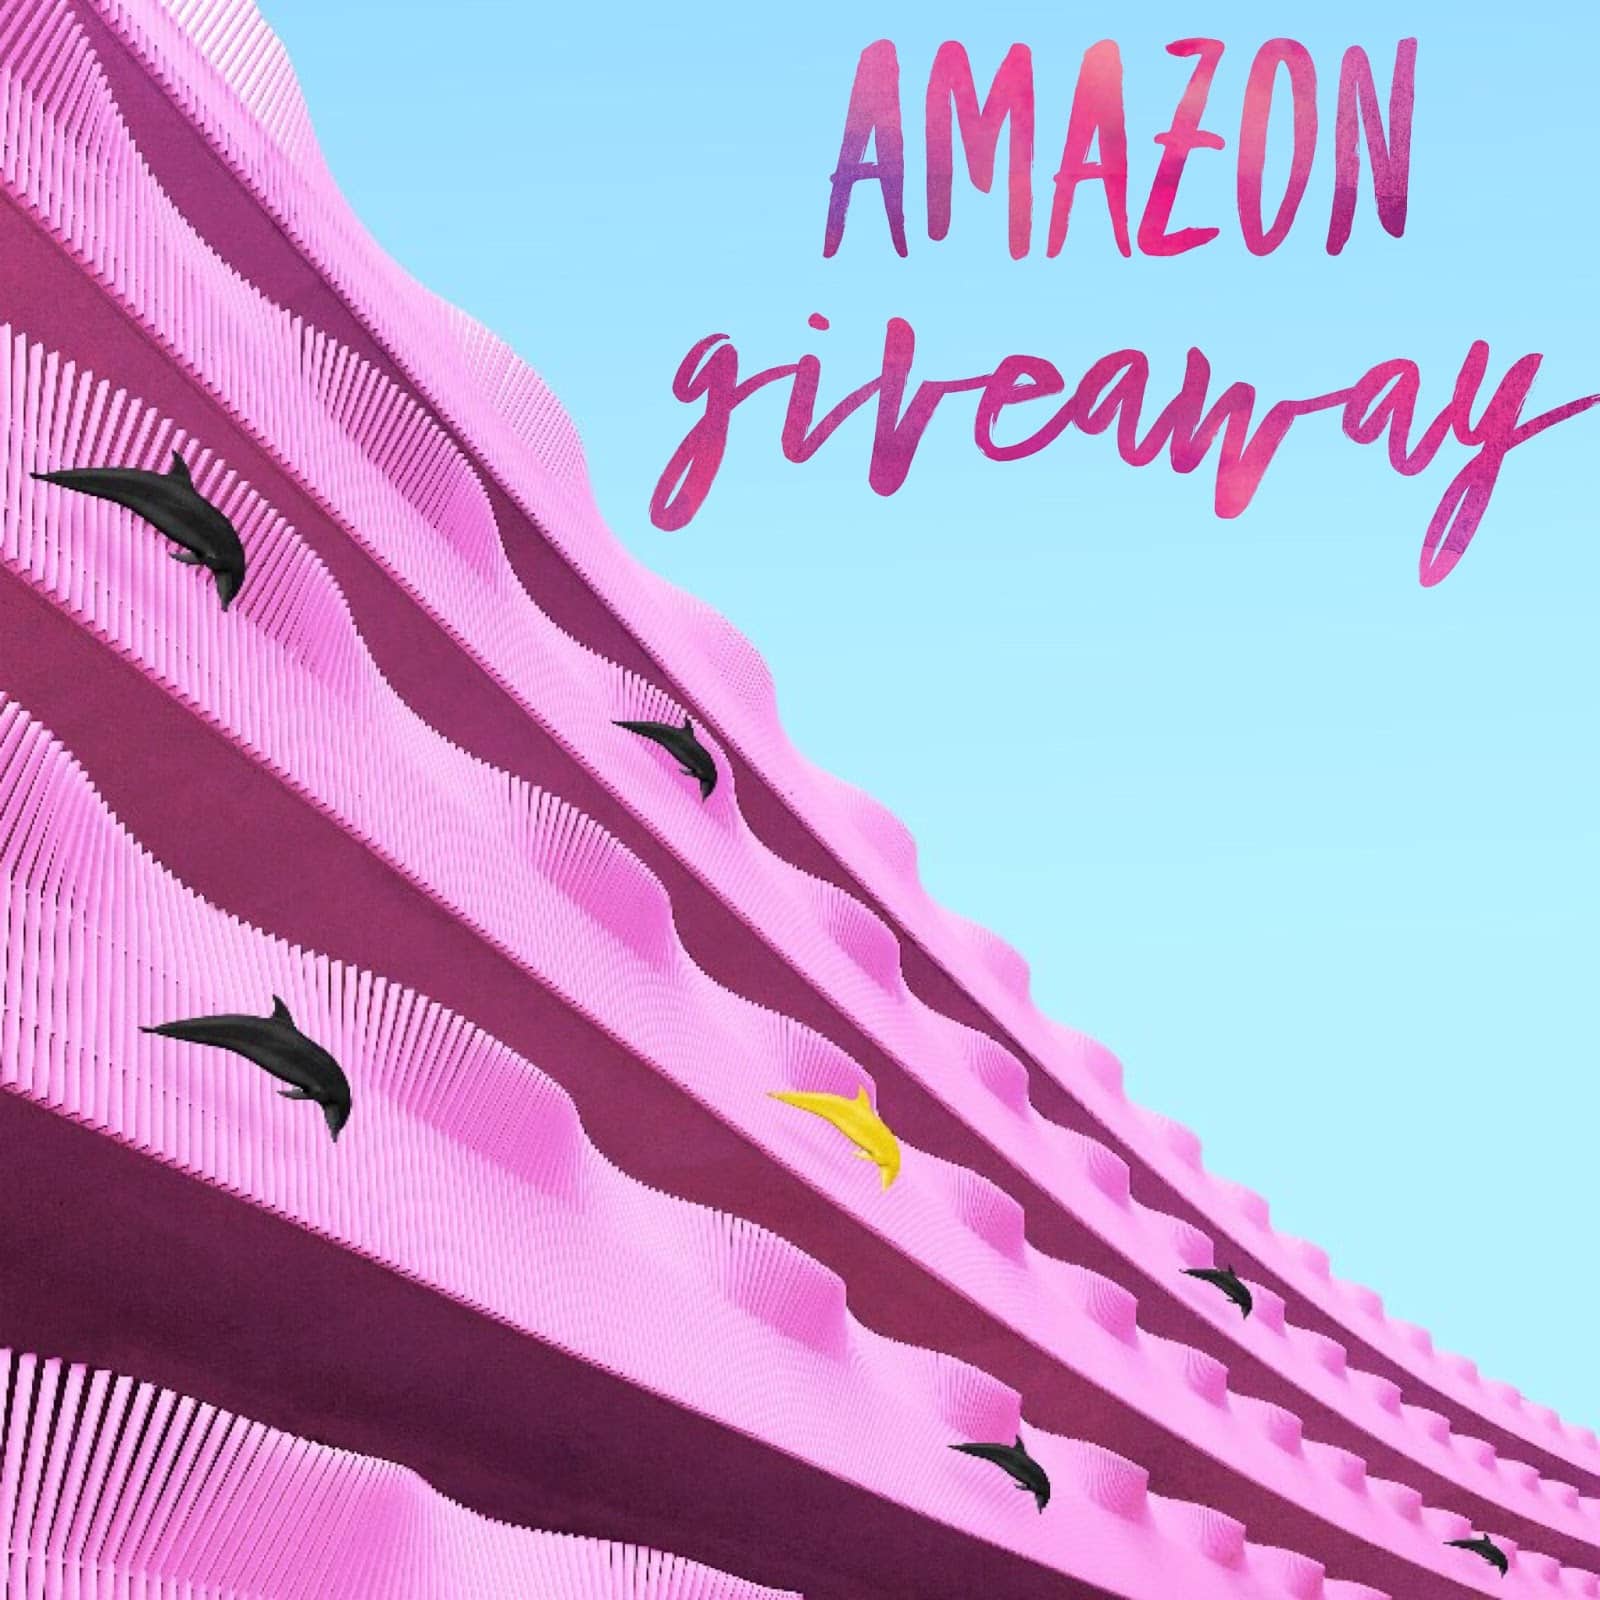 April Amazon Giveaway ends May 23rd, 2018